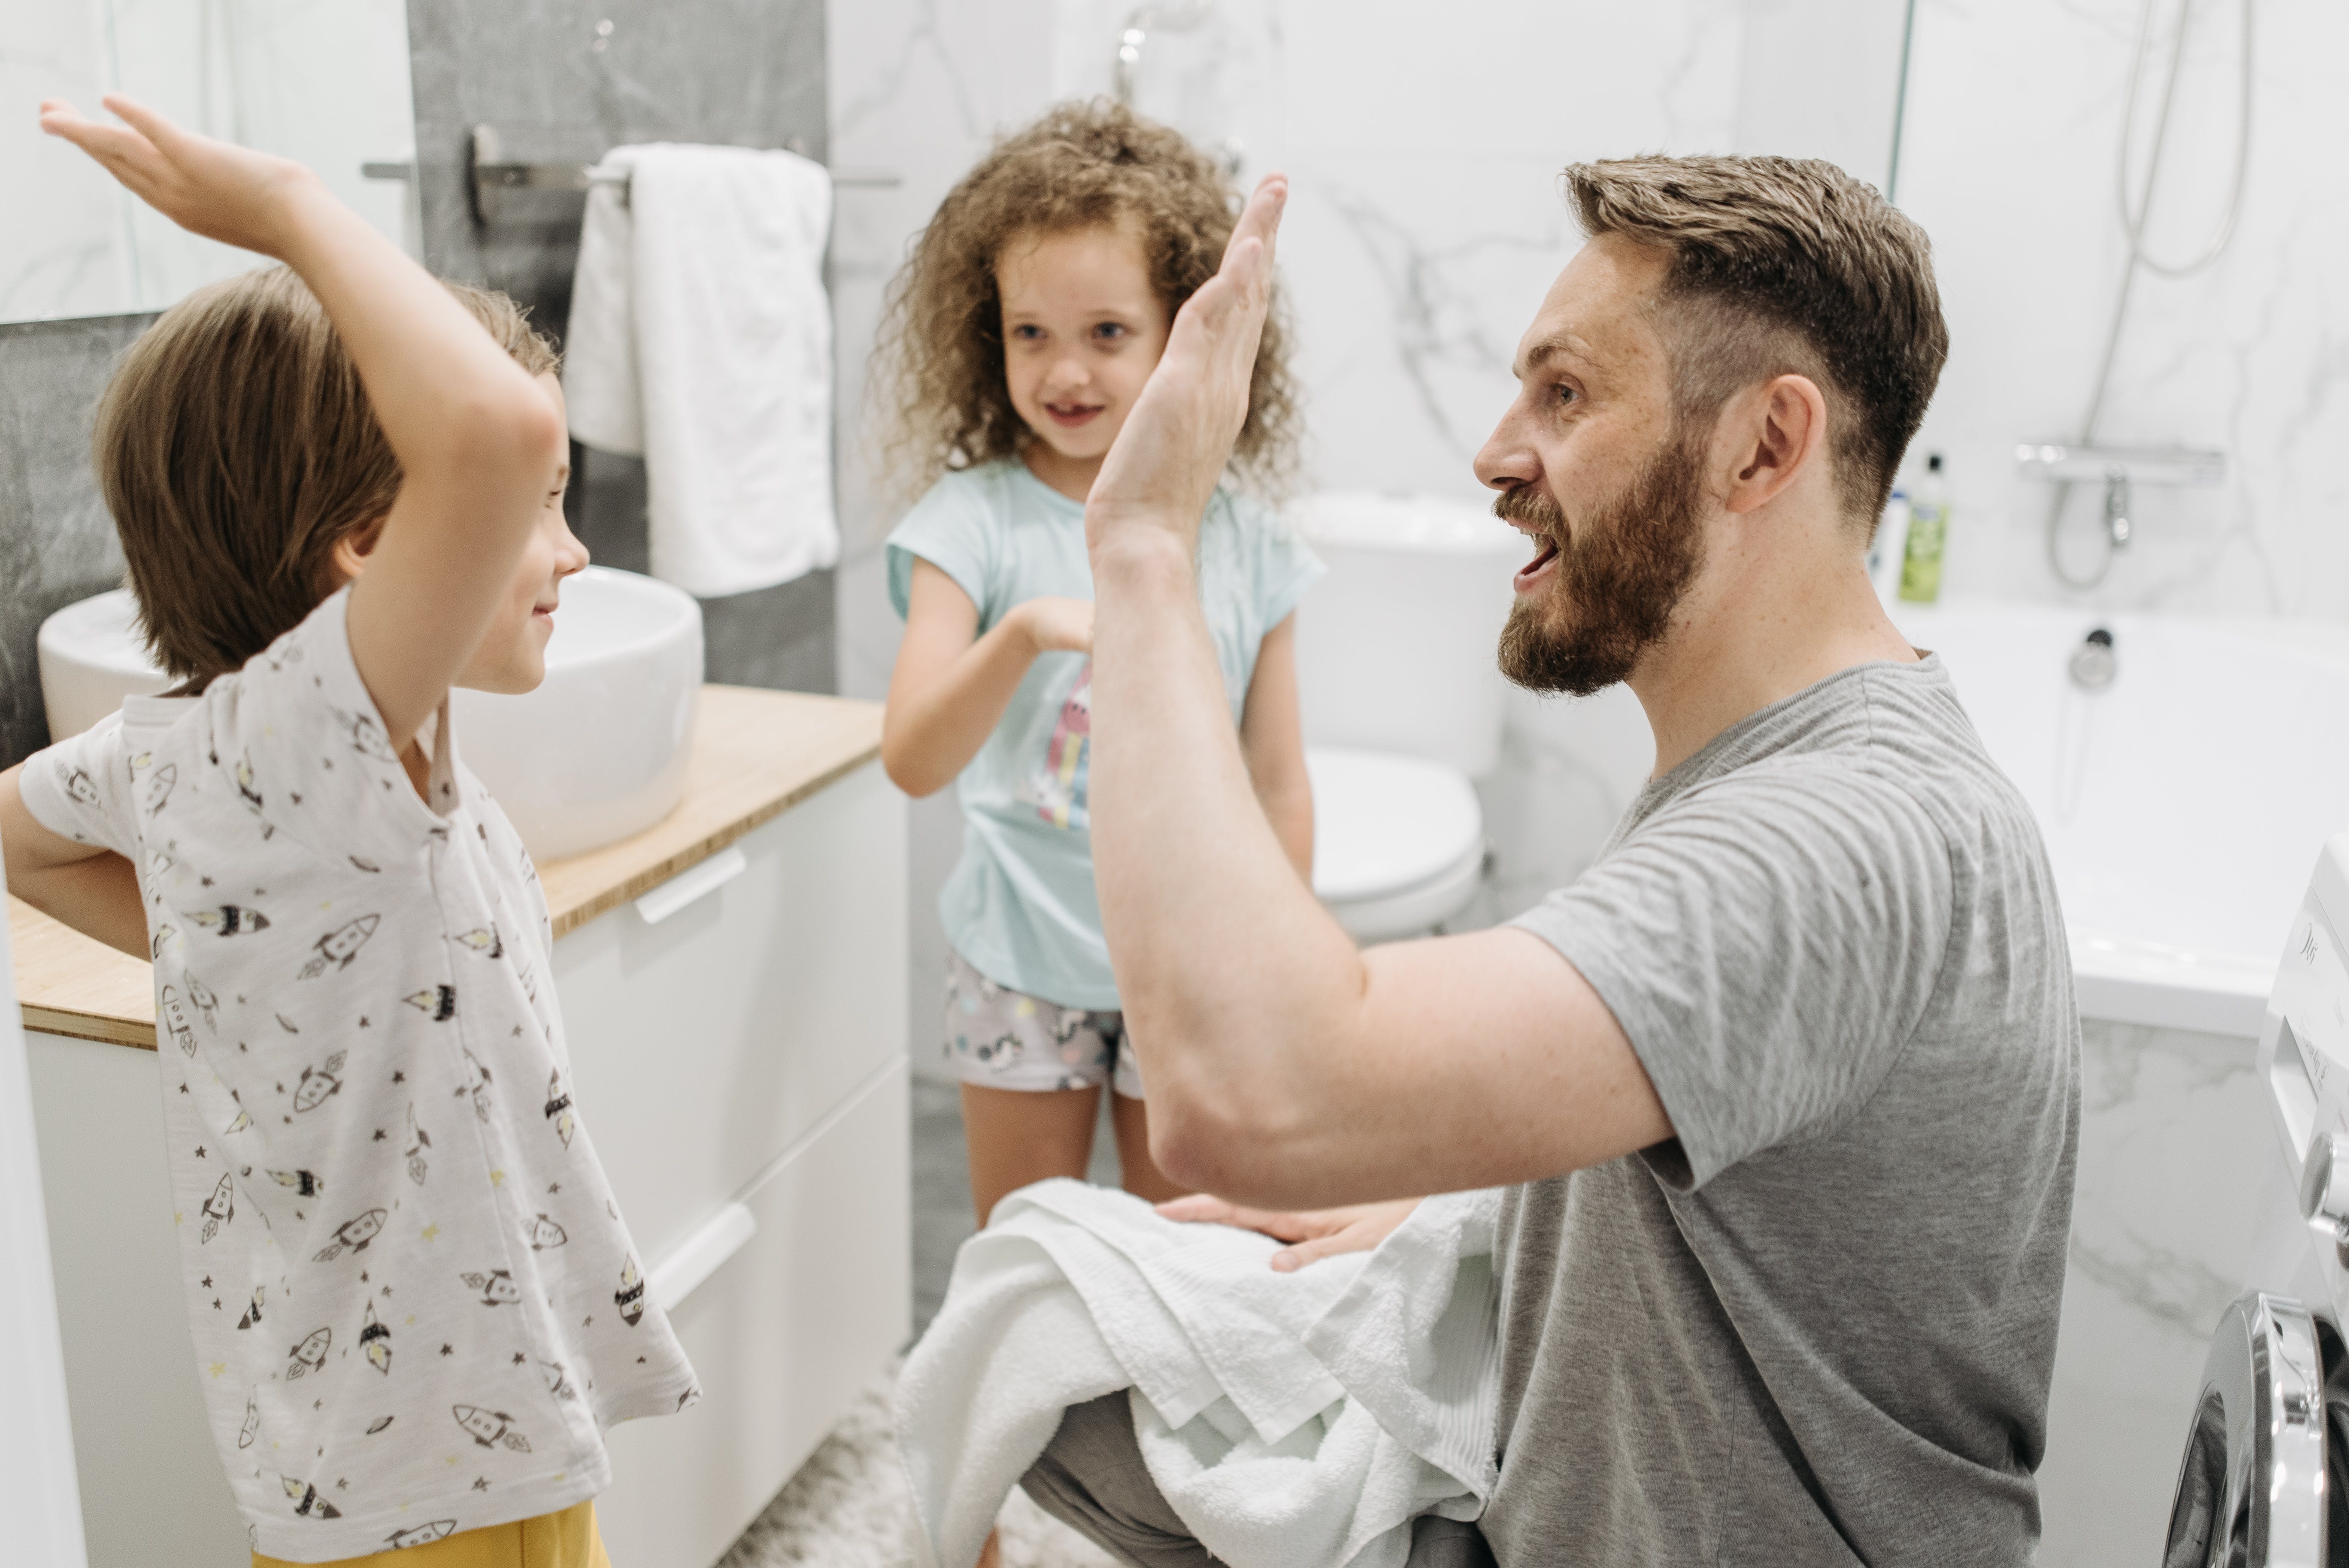 A man high-fiving a child while another looks on while in the bathroom | Source: Pexels